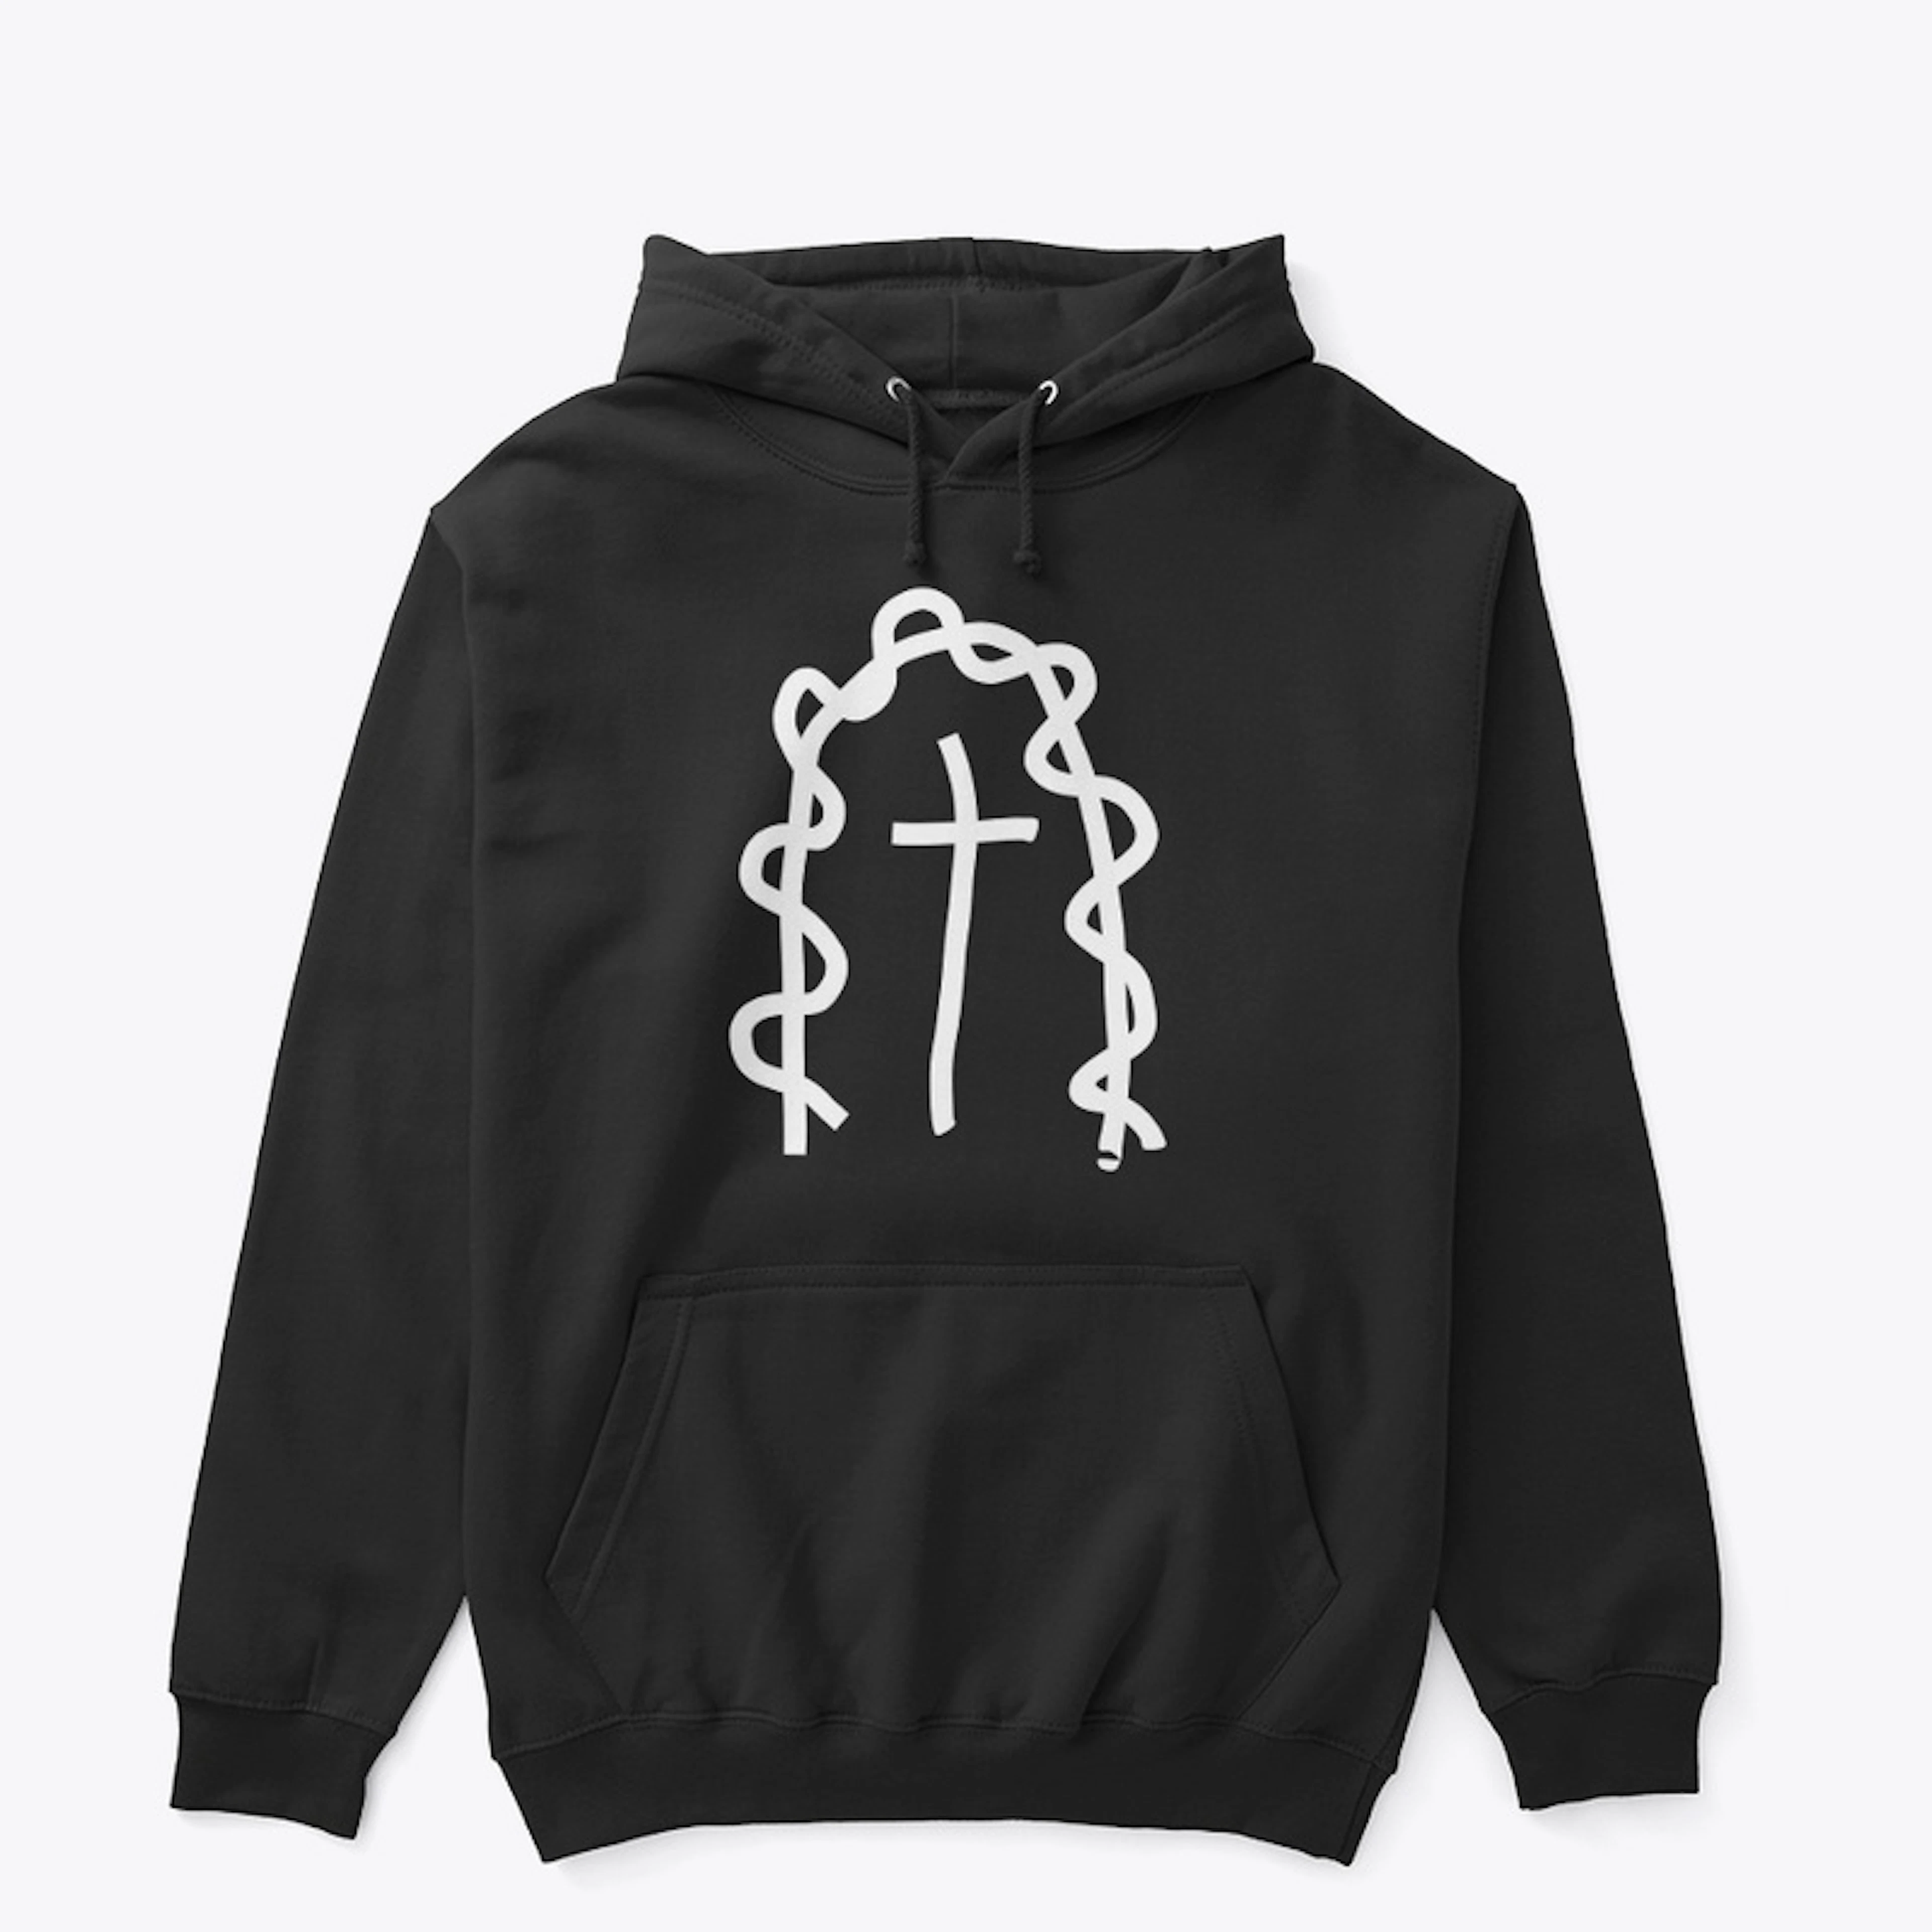 N Over T Unisex Classic Pullover Hoodie